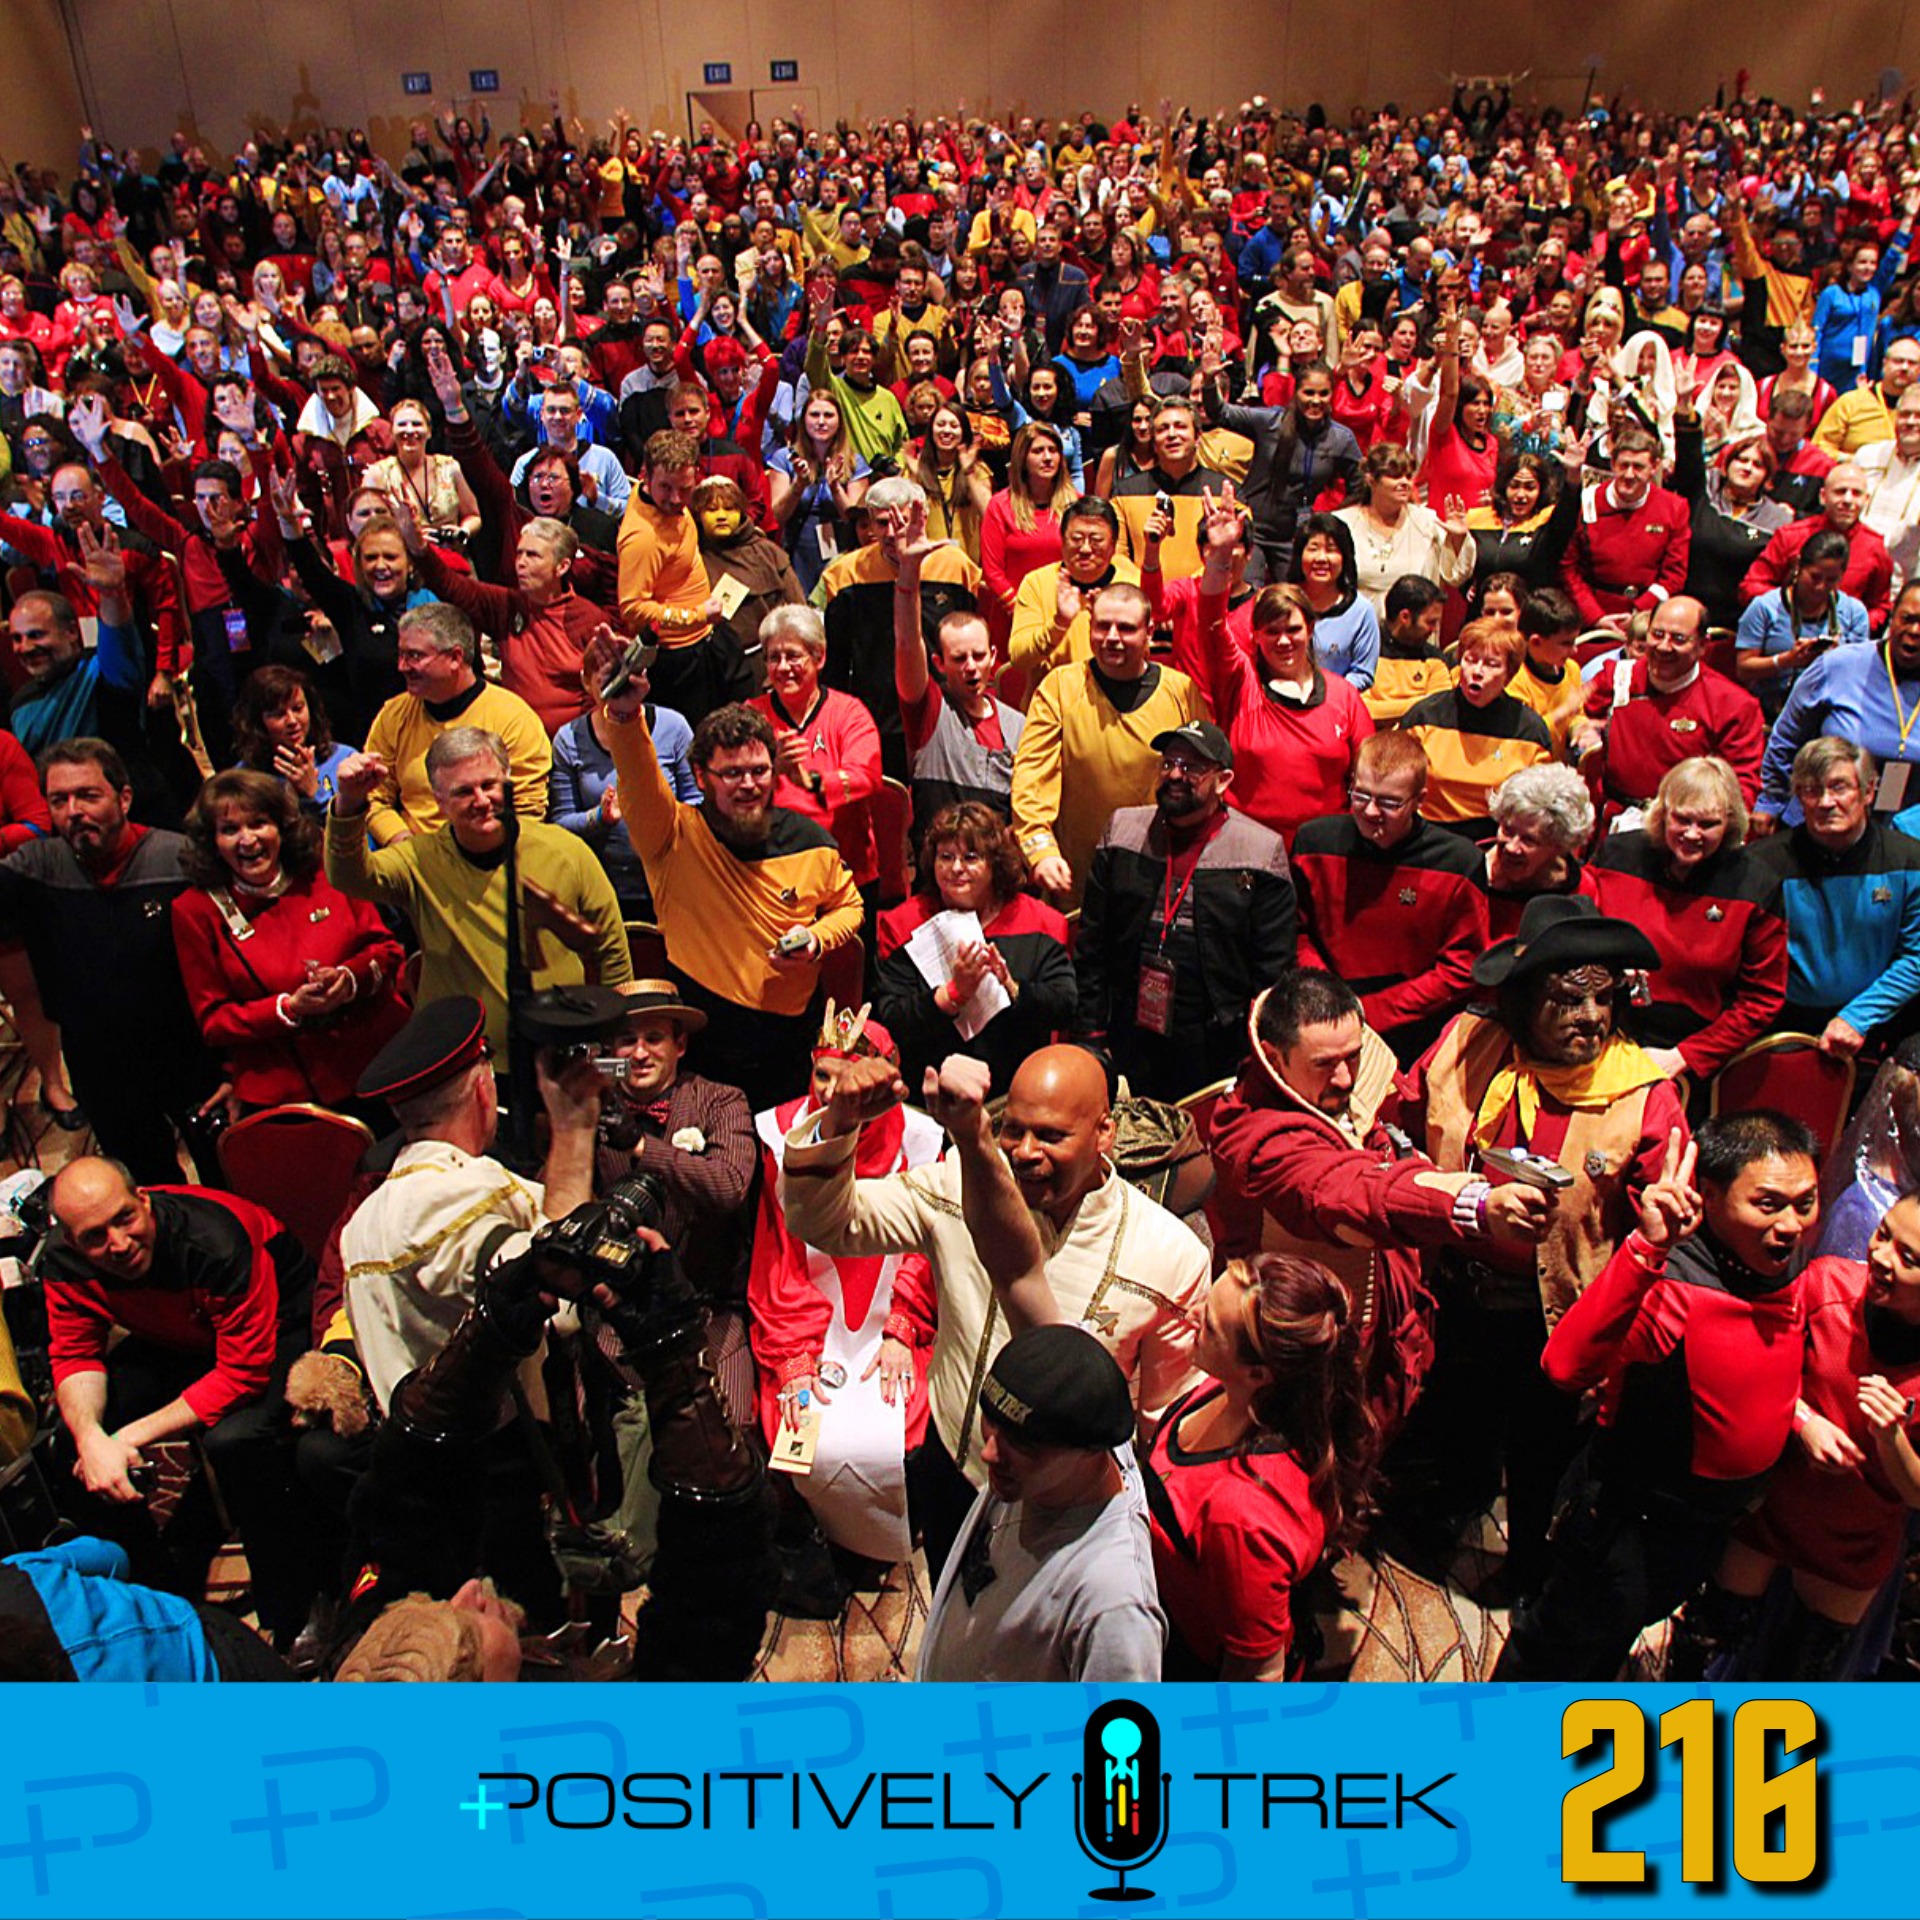 Star Trek Conventions and the Fans Who Love Them